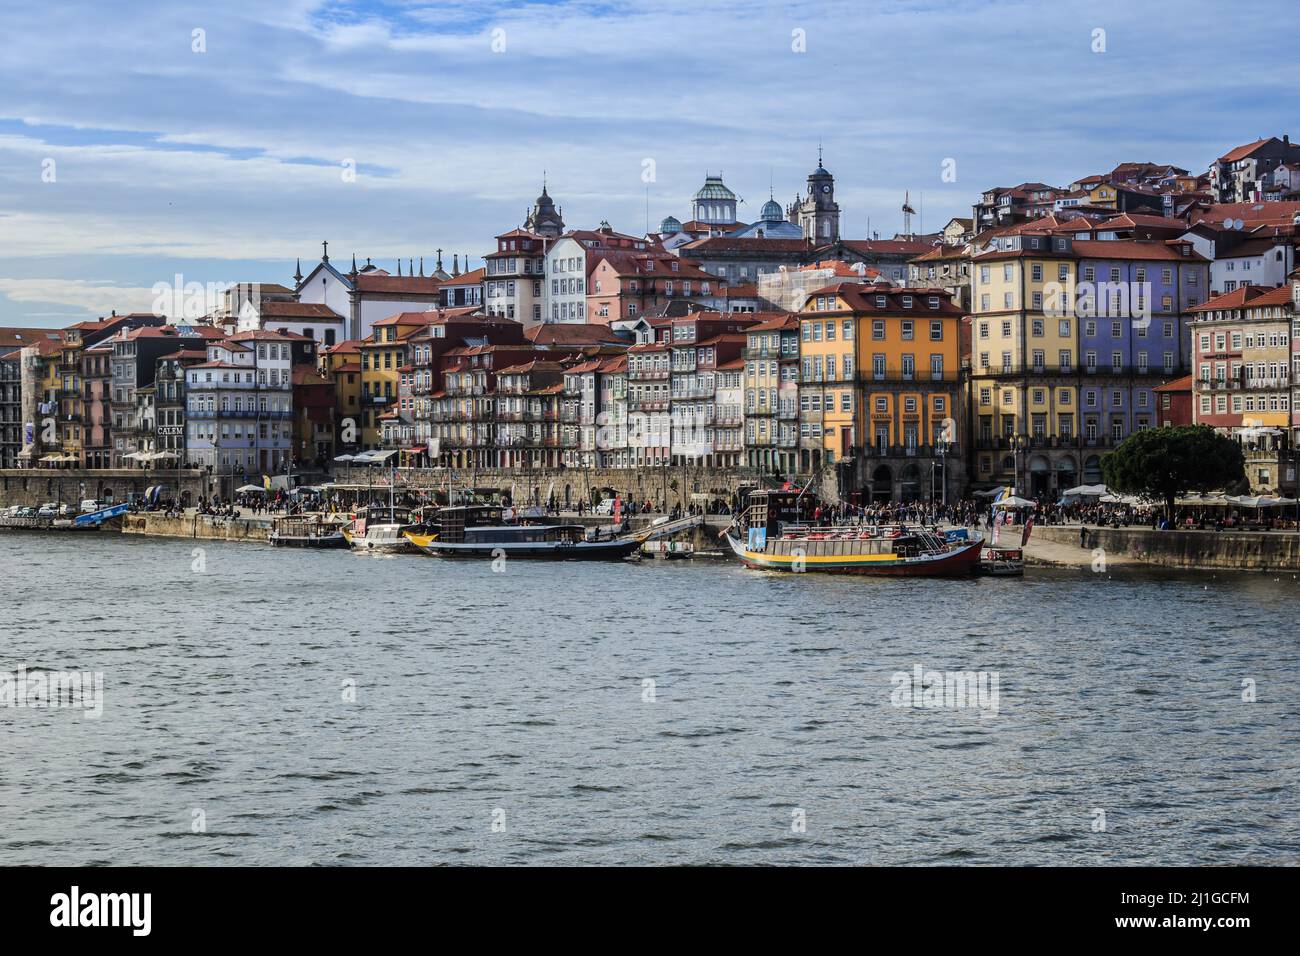 View of the old town along the Douro River in Porto, Portugal. Characteristic buildings and boats along the shore. Stock Photo